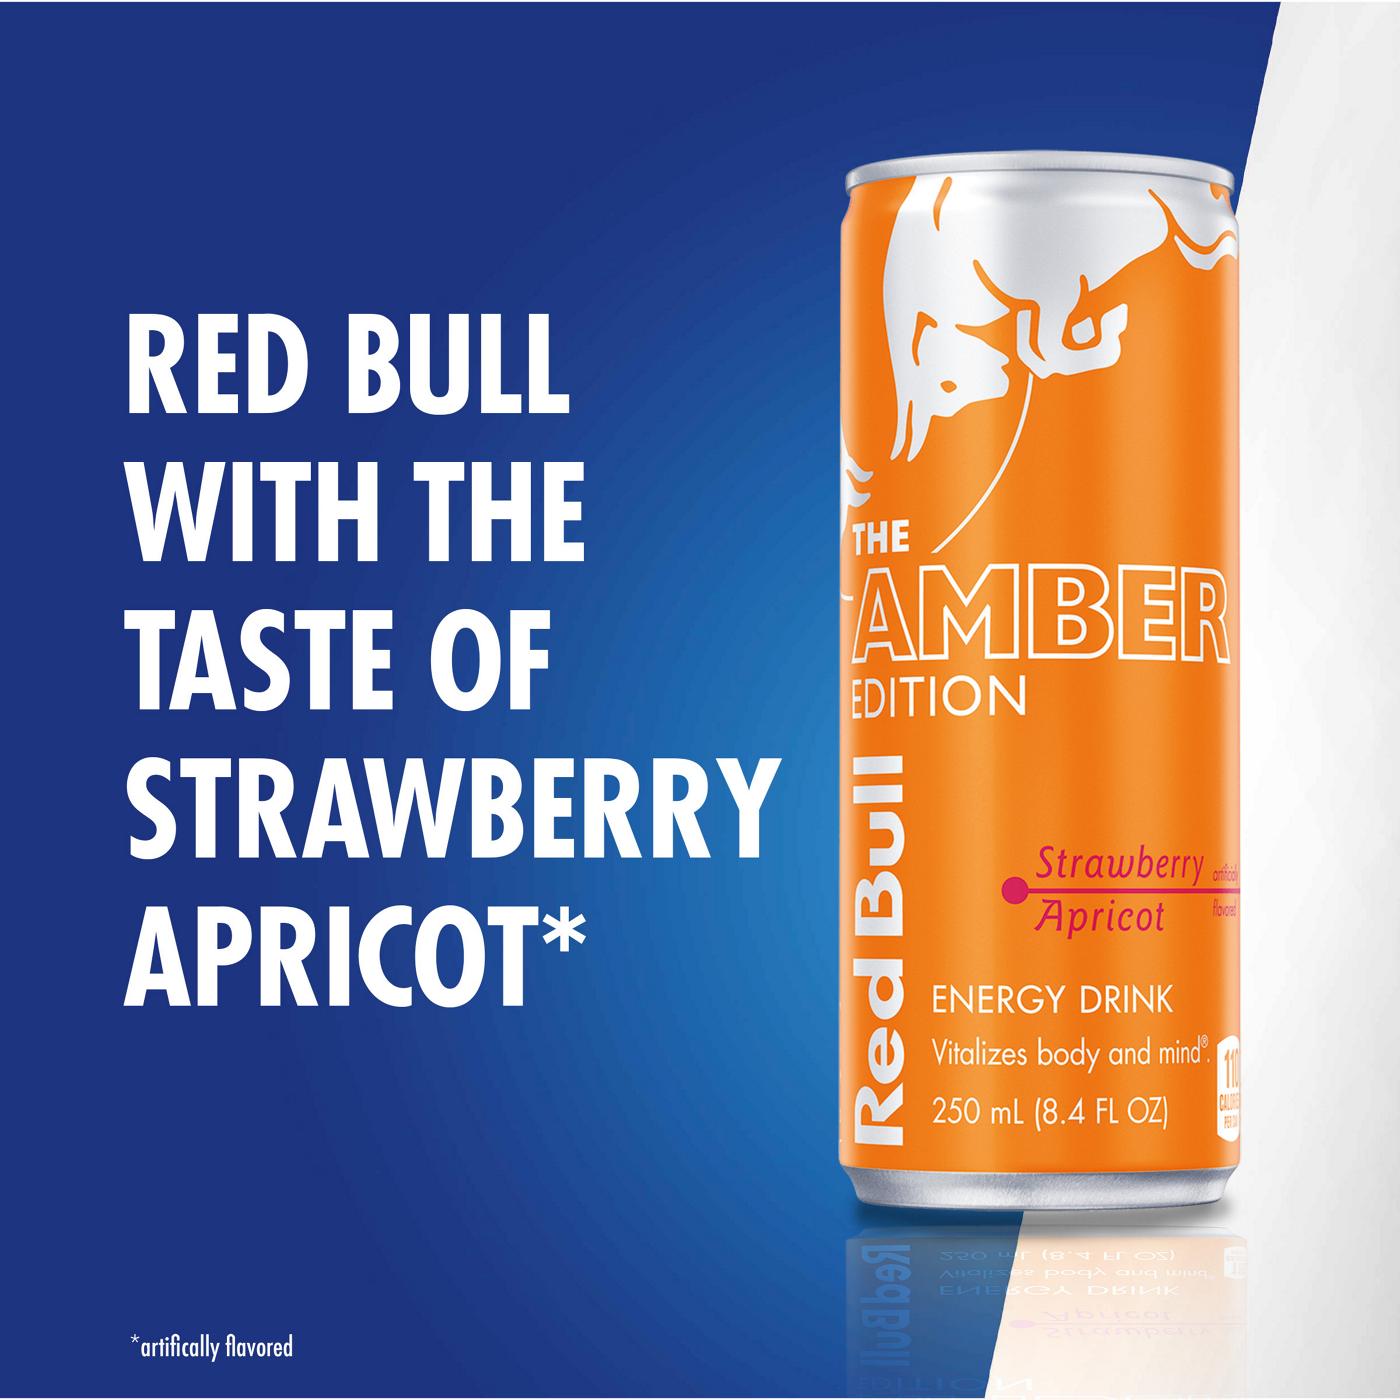 Red Bull The Amber Edition Strawberry Apricot Energy Drink 4 pk Cans; image 5 of 7